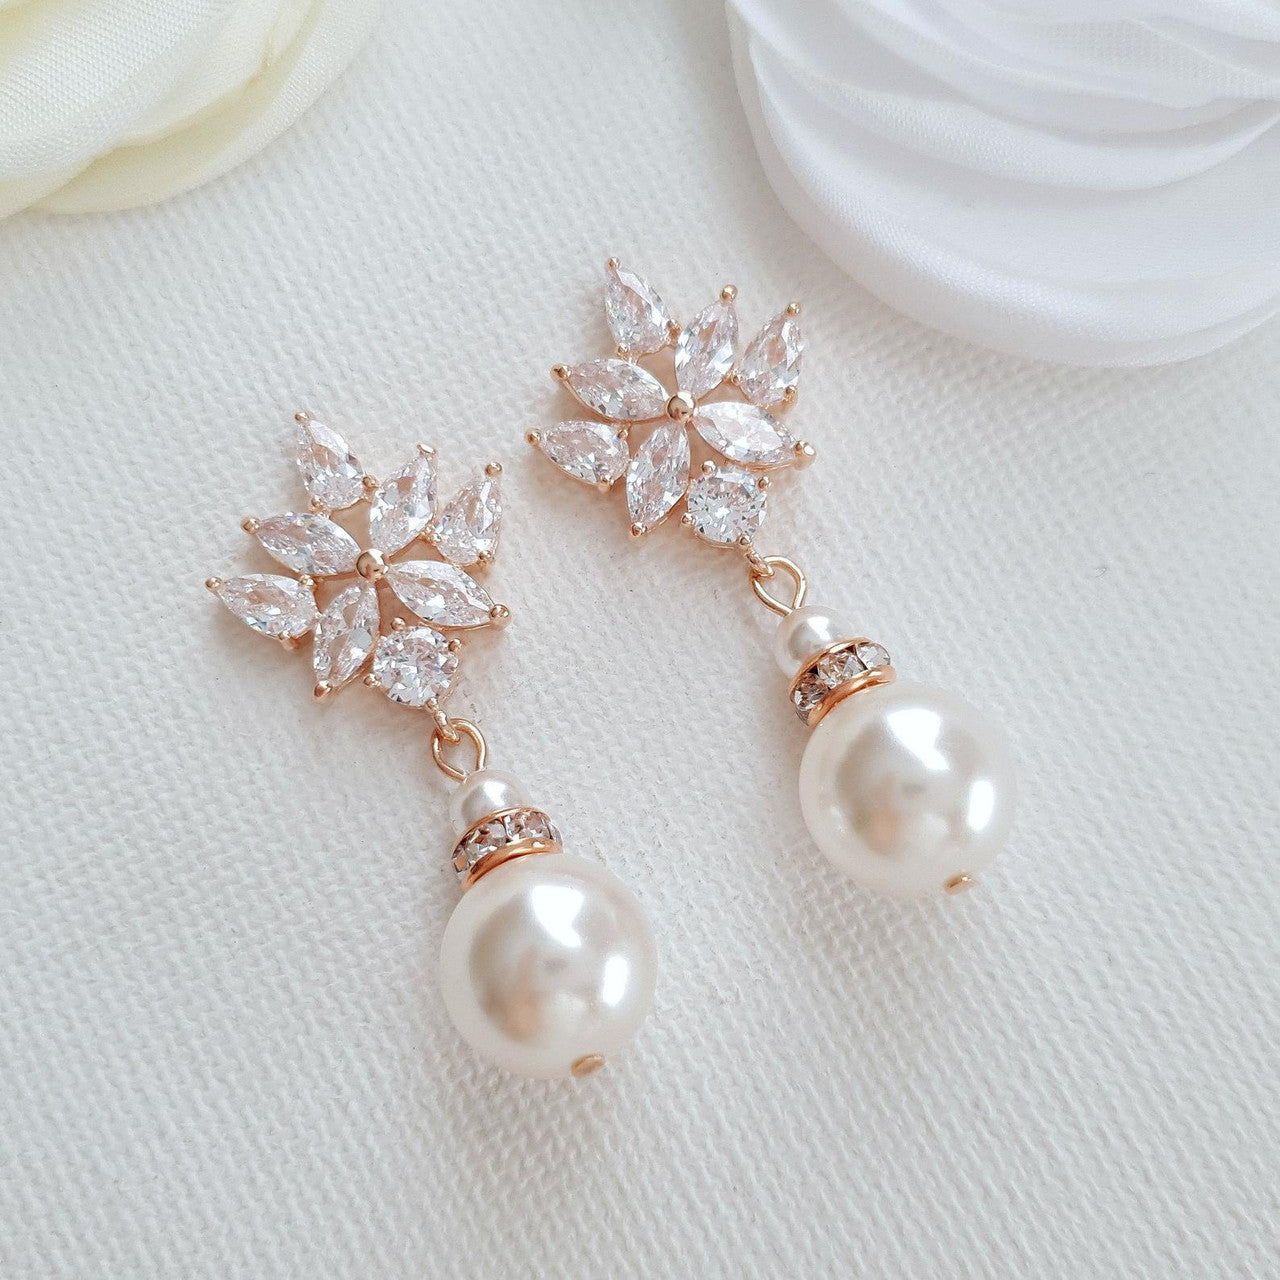 Wedding Drop Earrings in Rose Gold & Round Pearls- Rosa